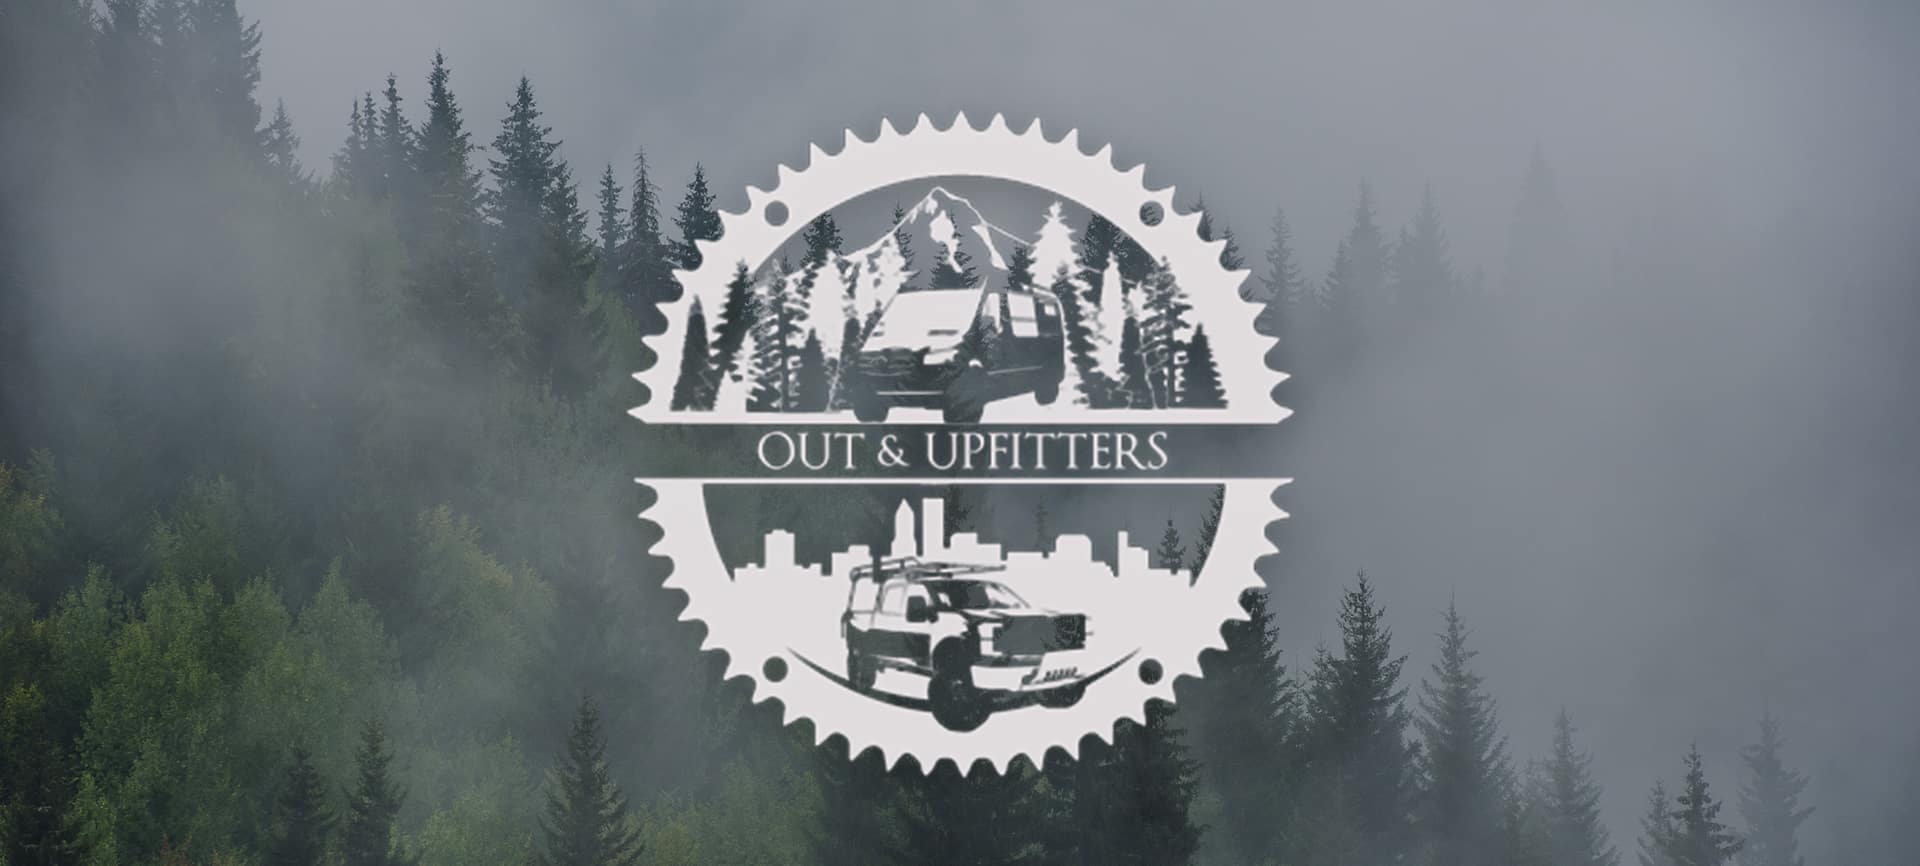 Out & Upfitters Logo